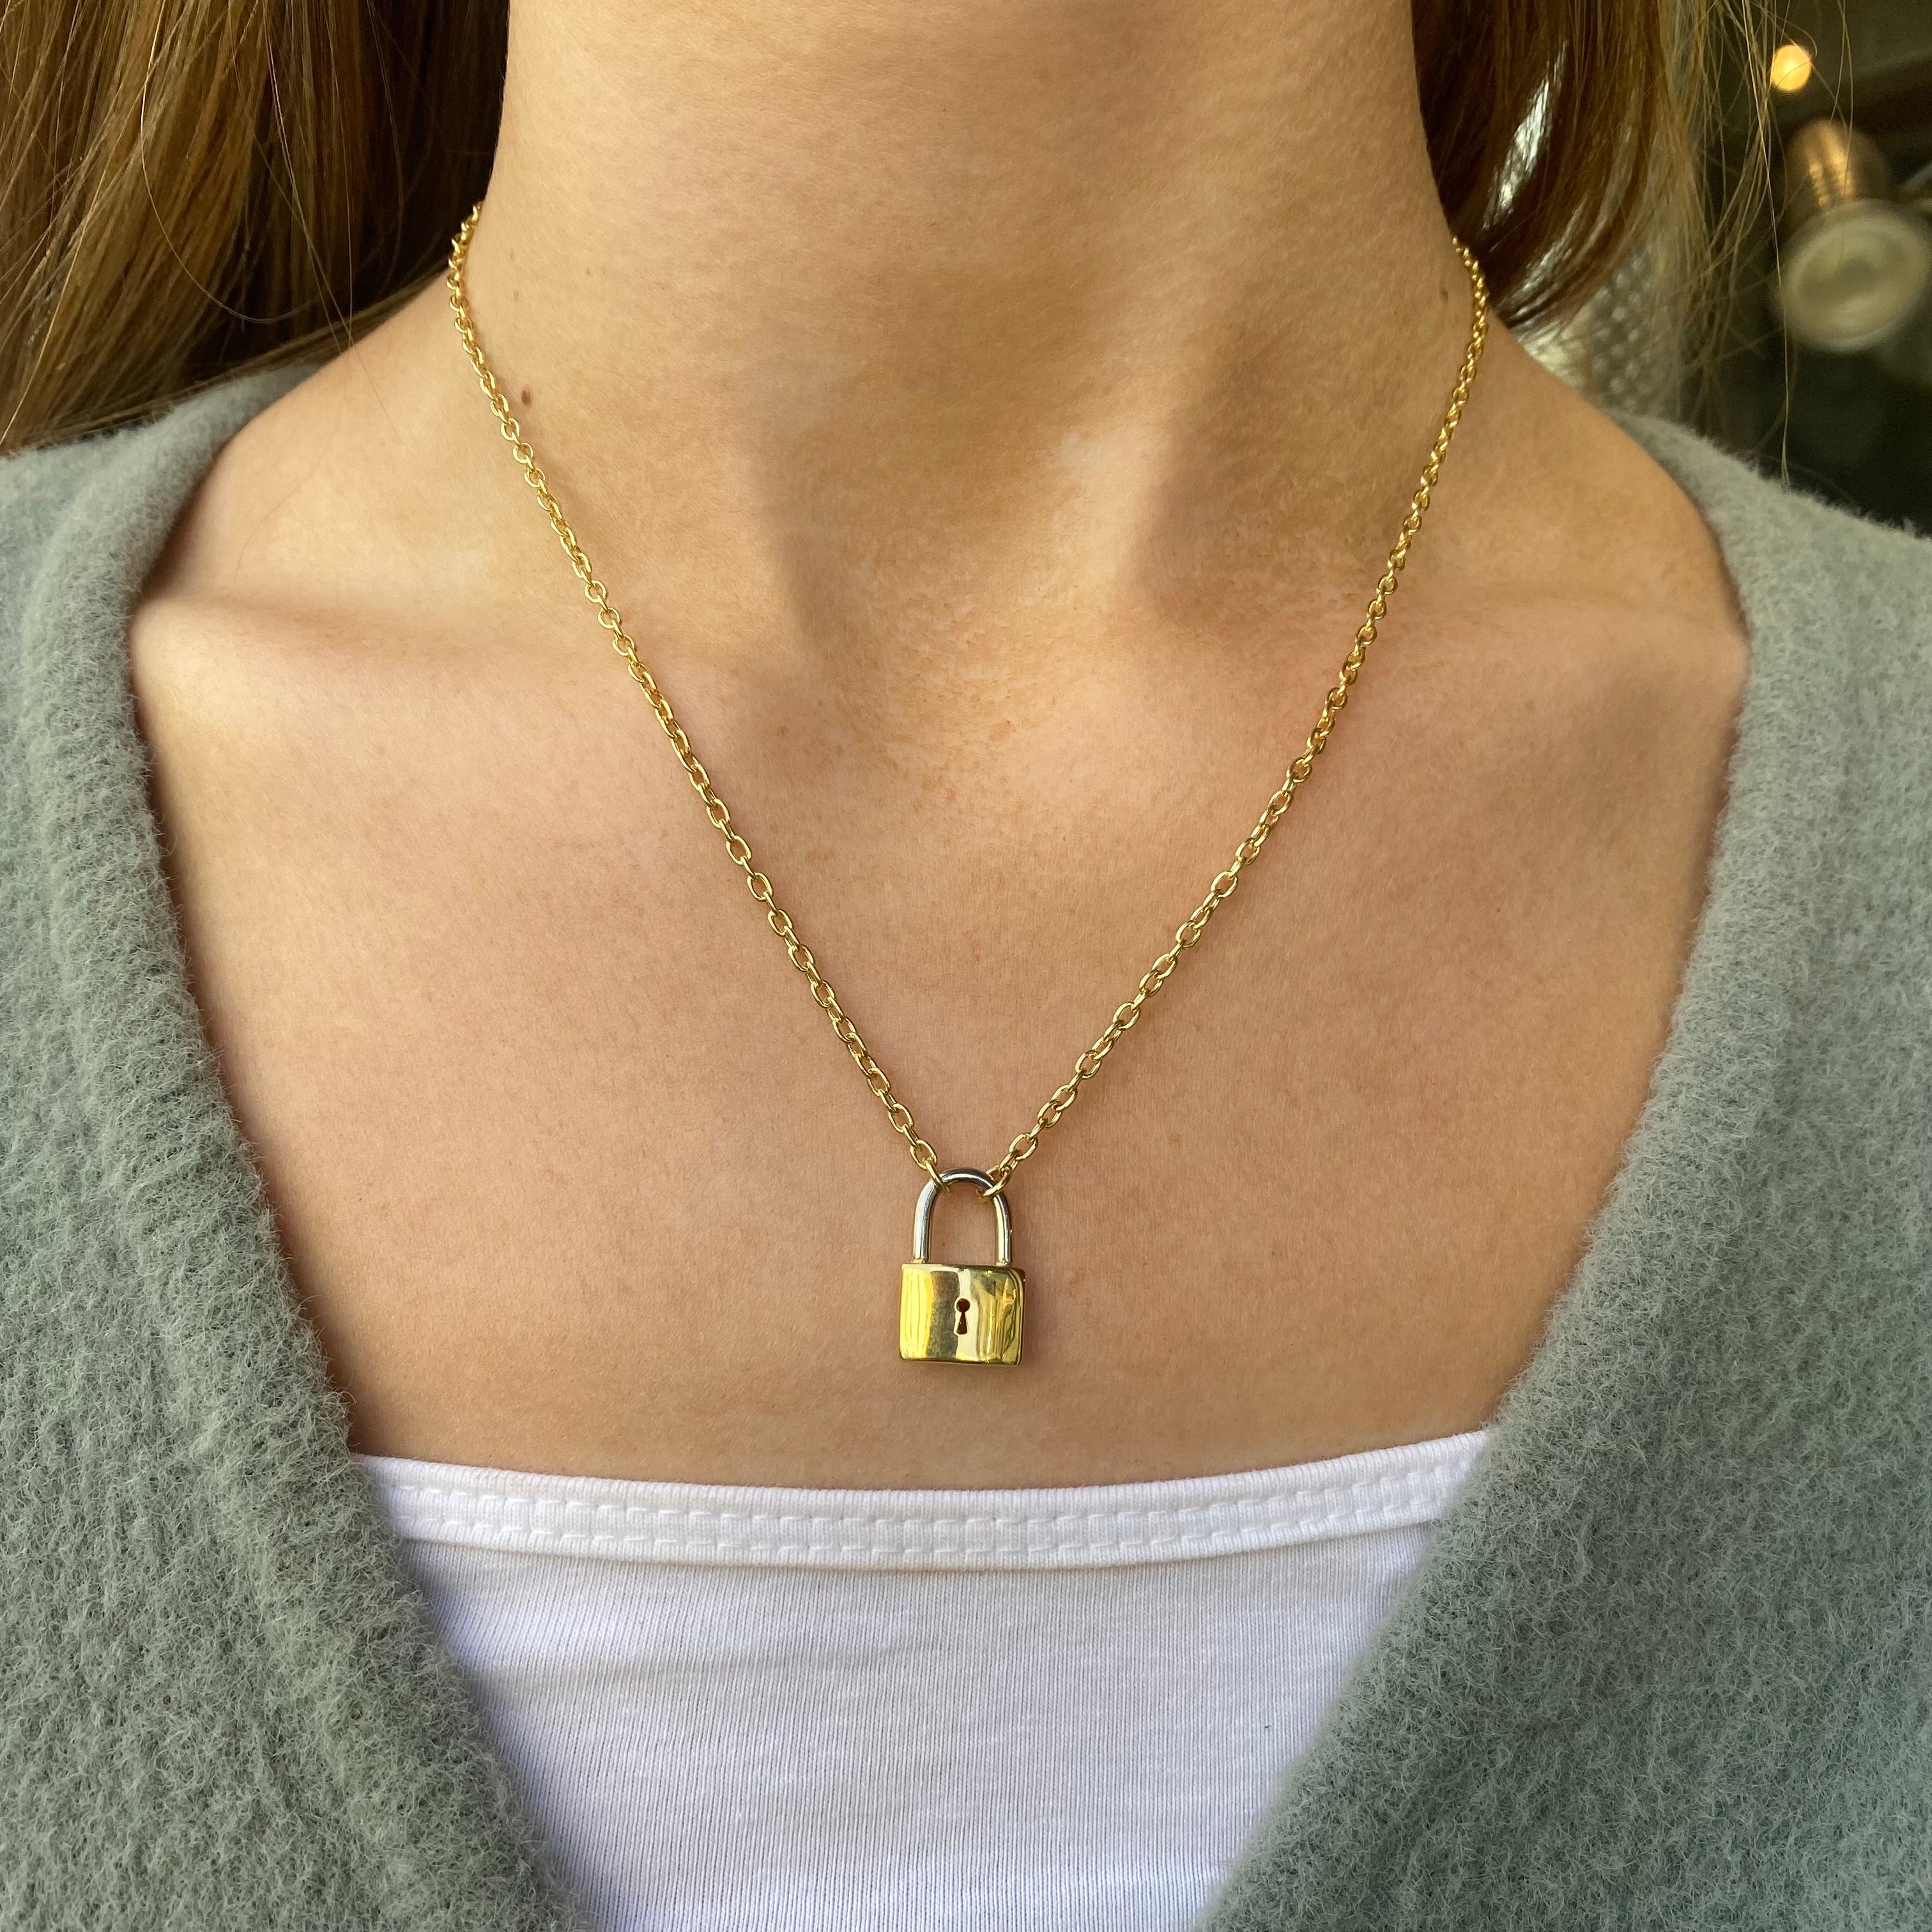 Mini Padlock Necklace – The Wholesome Store